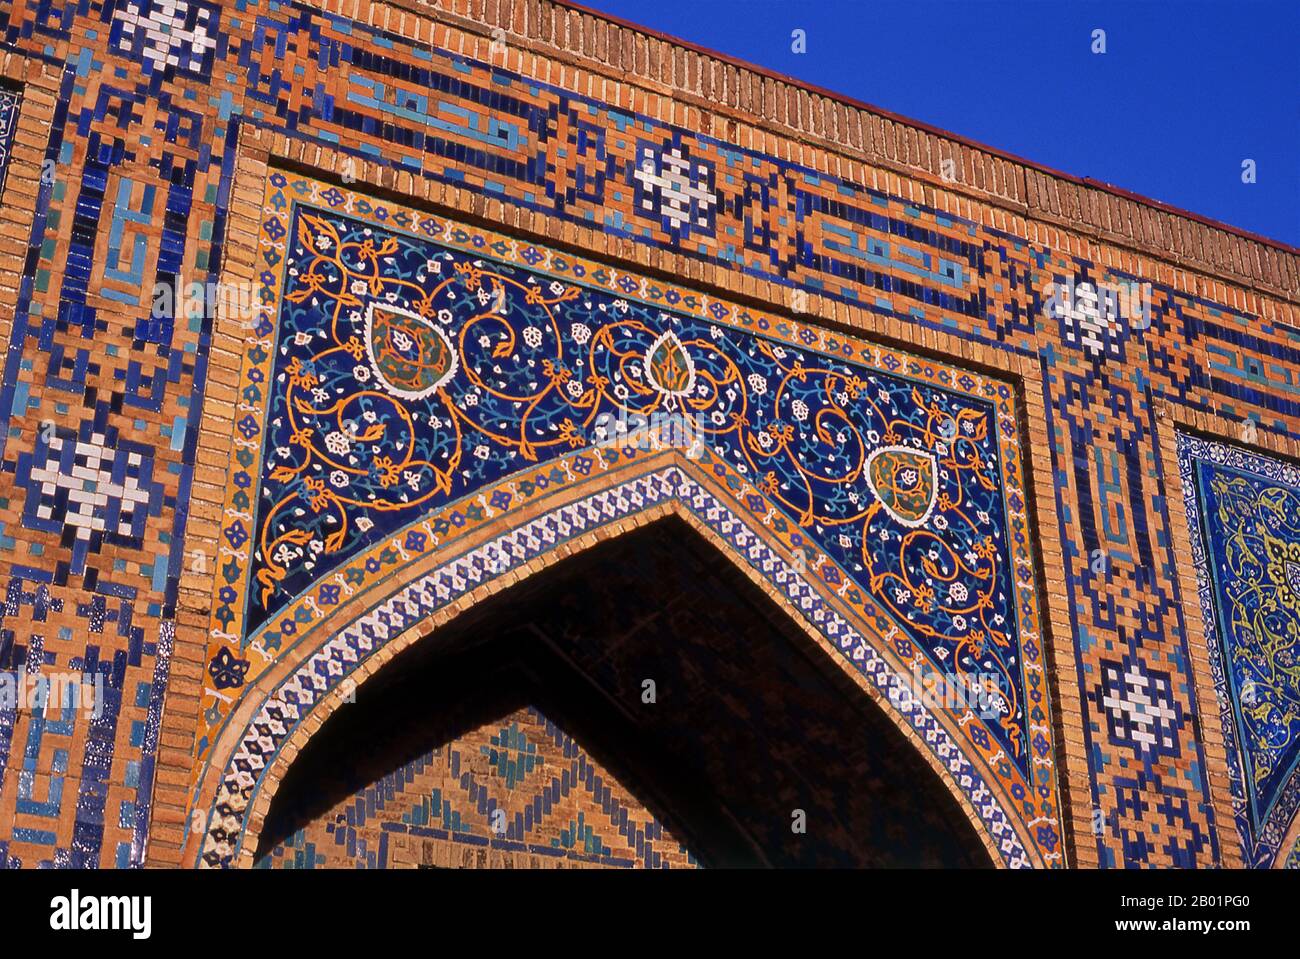 Uzbekistan: Intricate arabesque decorations in the inner courtyard of Tillya Kari Madrassa, The Registan, Samarkand.  The Registan contains three madrasahs (schools), the Ulugh Beg Madrasah (1417-1420), Tilya-Kori Madrasah (1646-1660) and the Sher-Dor Madrasah (1619-1636).  The Tilya-Kori Madrasah was built in the mid-17th century by the Shaybanid Amir Yalangtush. The name Tilya-Kori means ‘gilded’ or ‘gold-covered’, and the entire building is lavishly decorated with elaborate geometrical arabesques and sura from the Qur’an both outside and especially within. Stock Photo